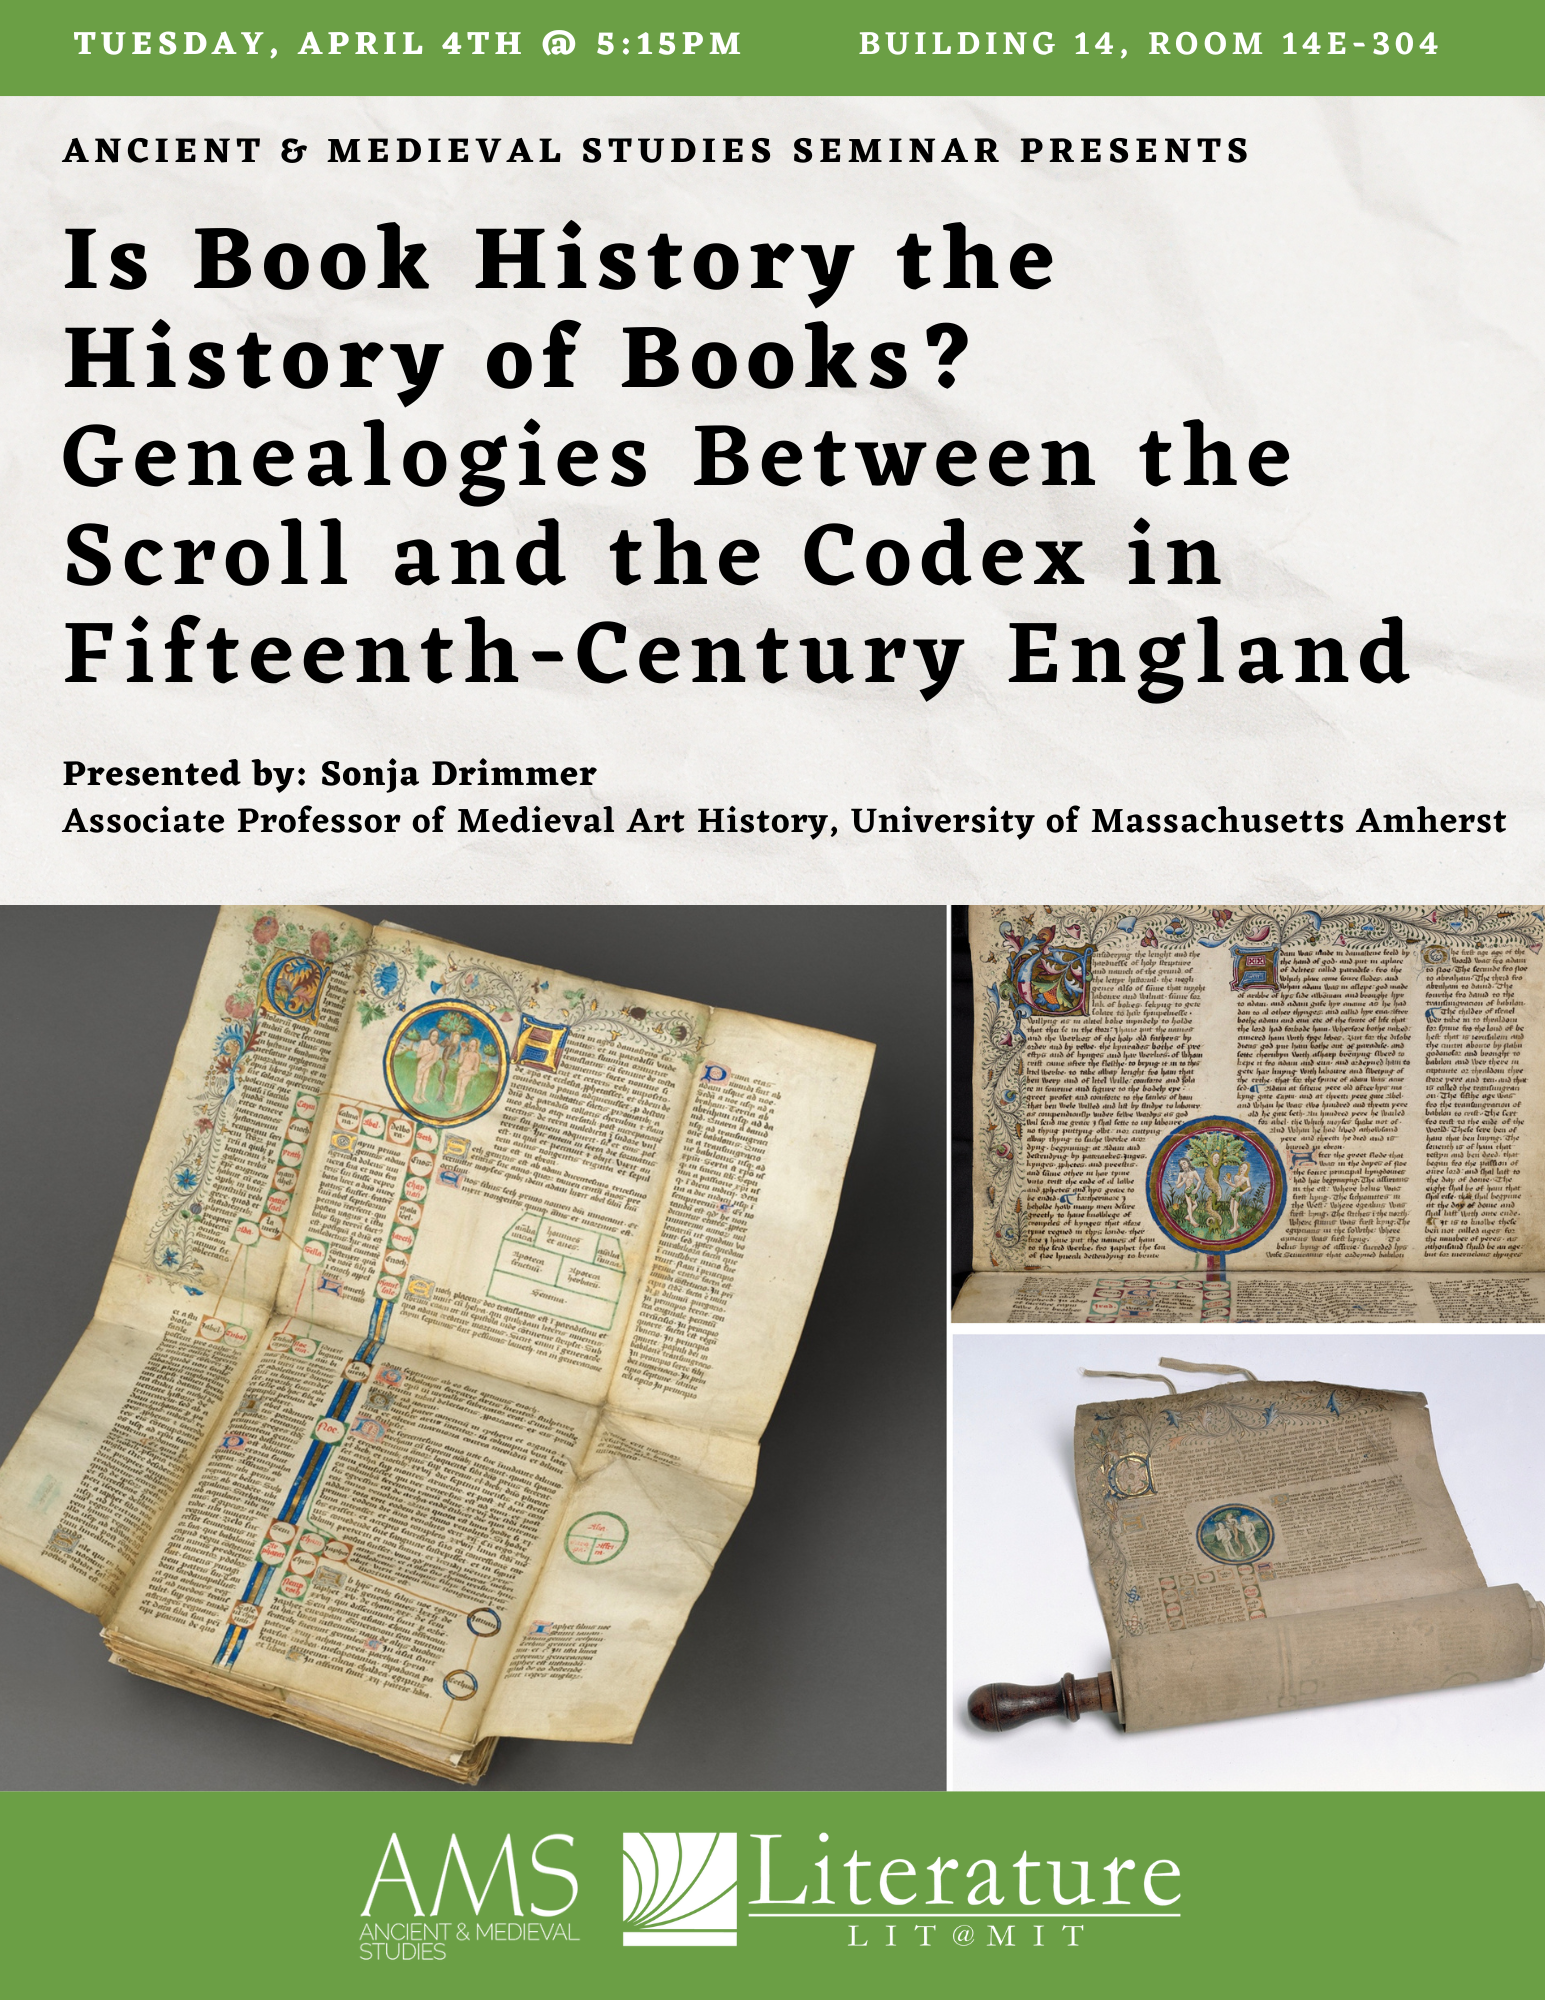 AMS presents, Sonja Drimmer, “Is Book History the History of Books? Genealogies Between the Scroll and the Codex in Fifteenth-Century England”